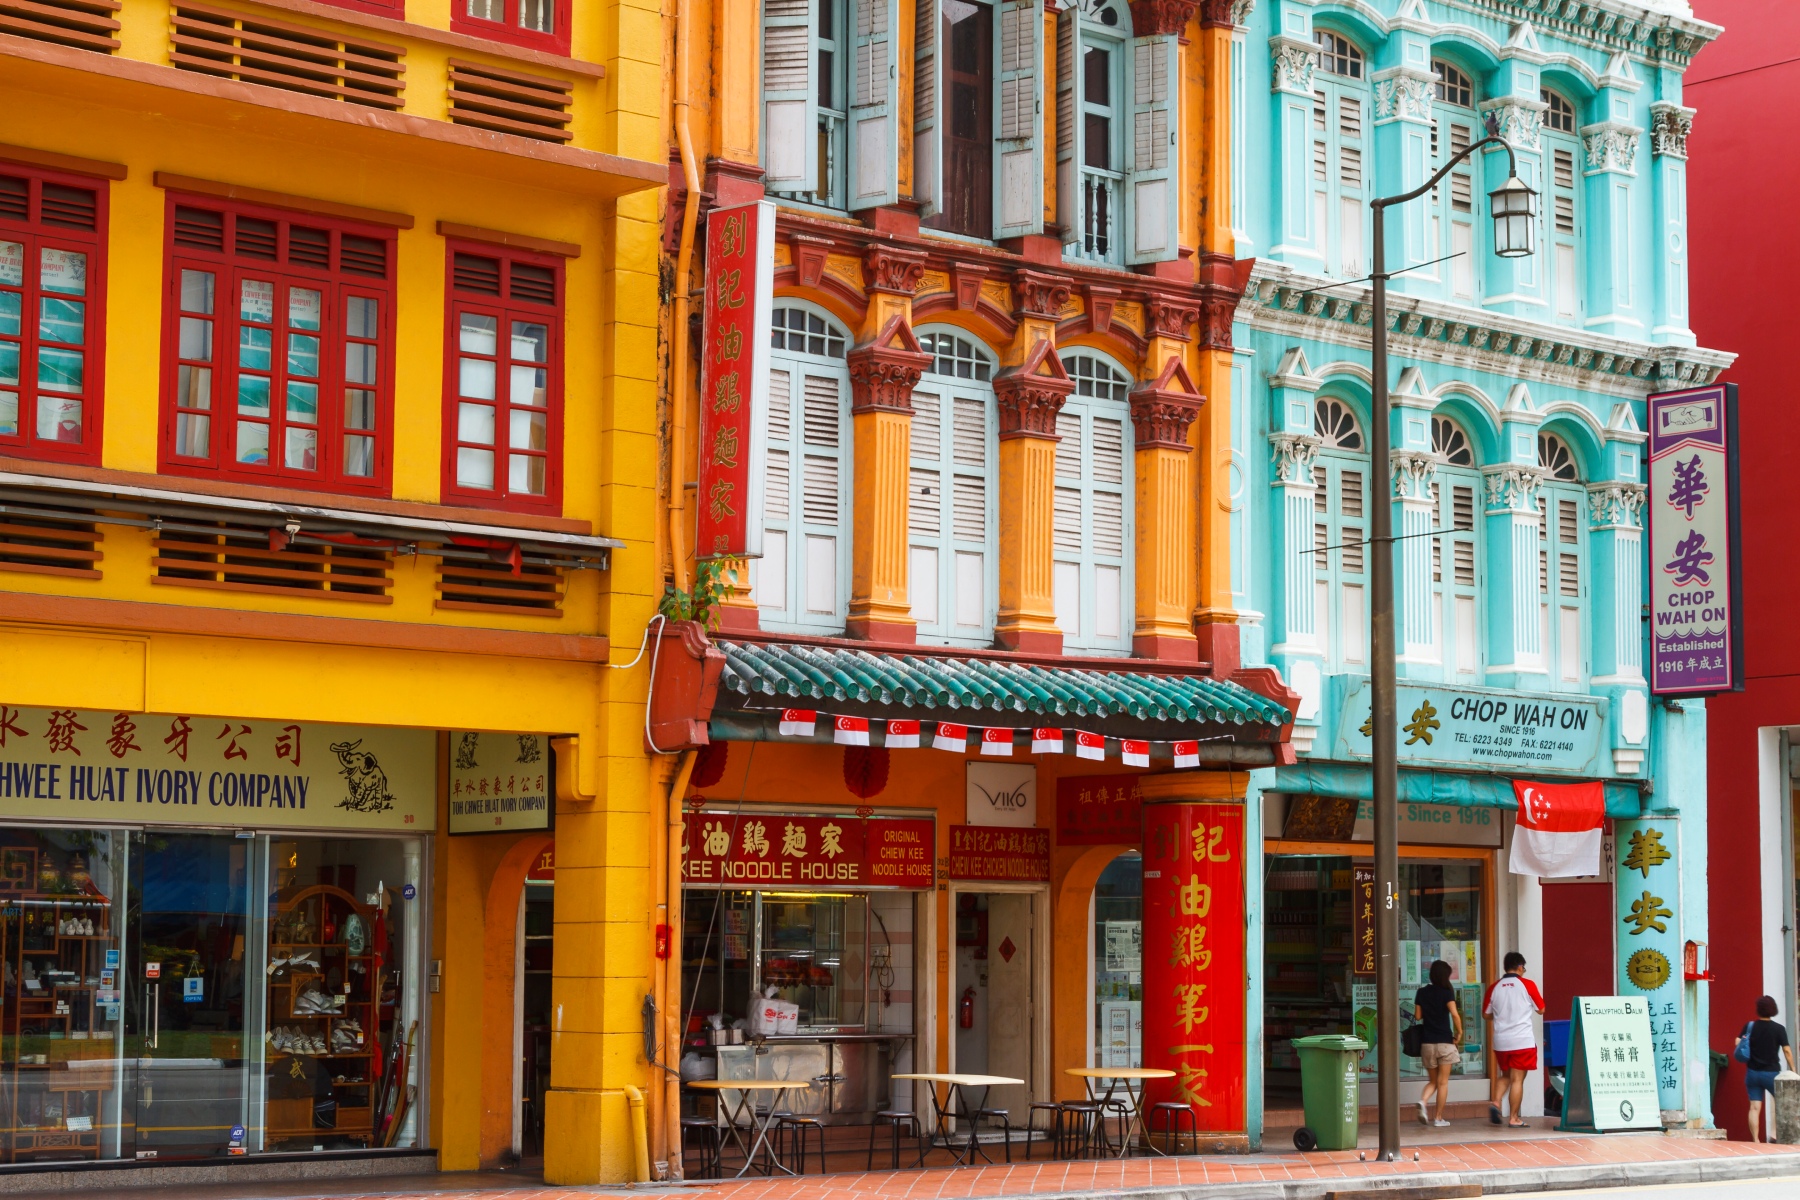 Colorful buildings in Chinatown district